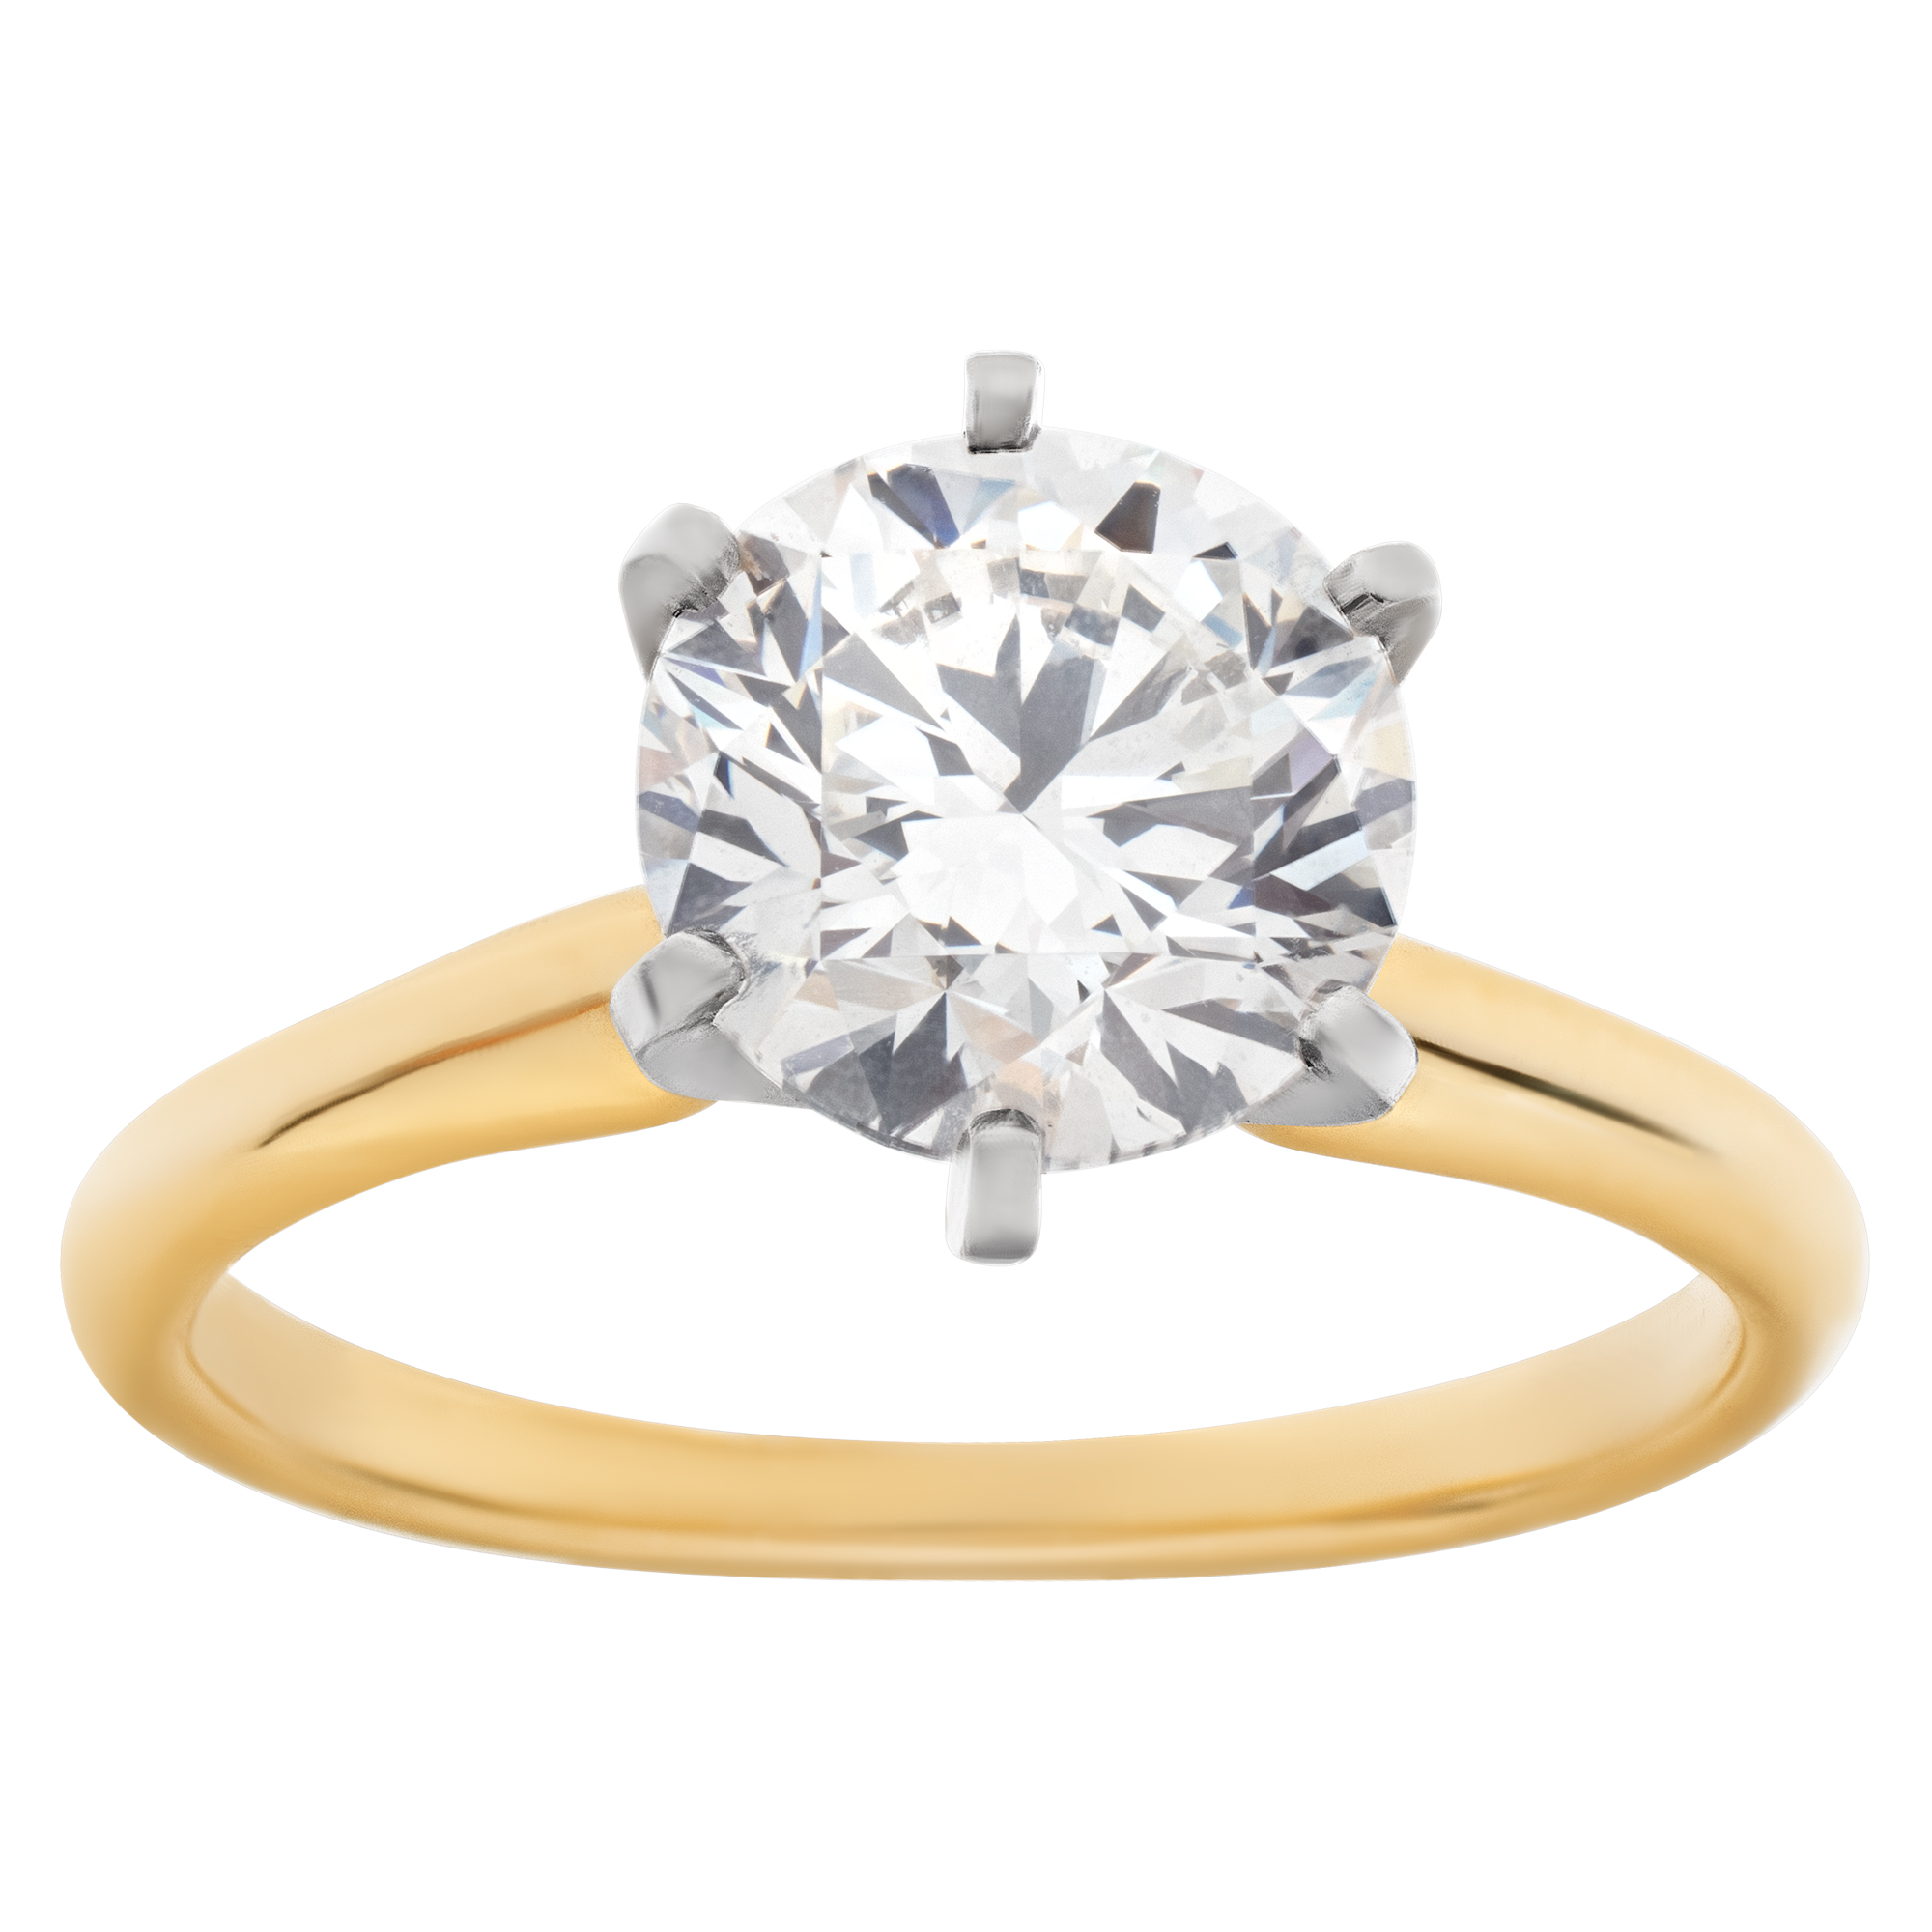 GIA certified round brilliant cut diamond 2.02 carat (G color, VVS2 clarity) solitaire ring image 1